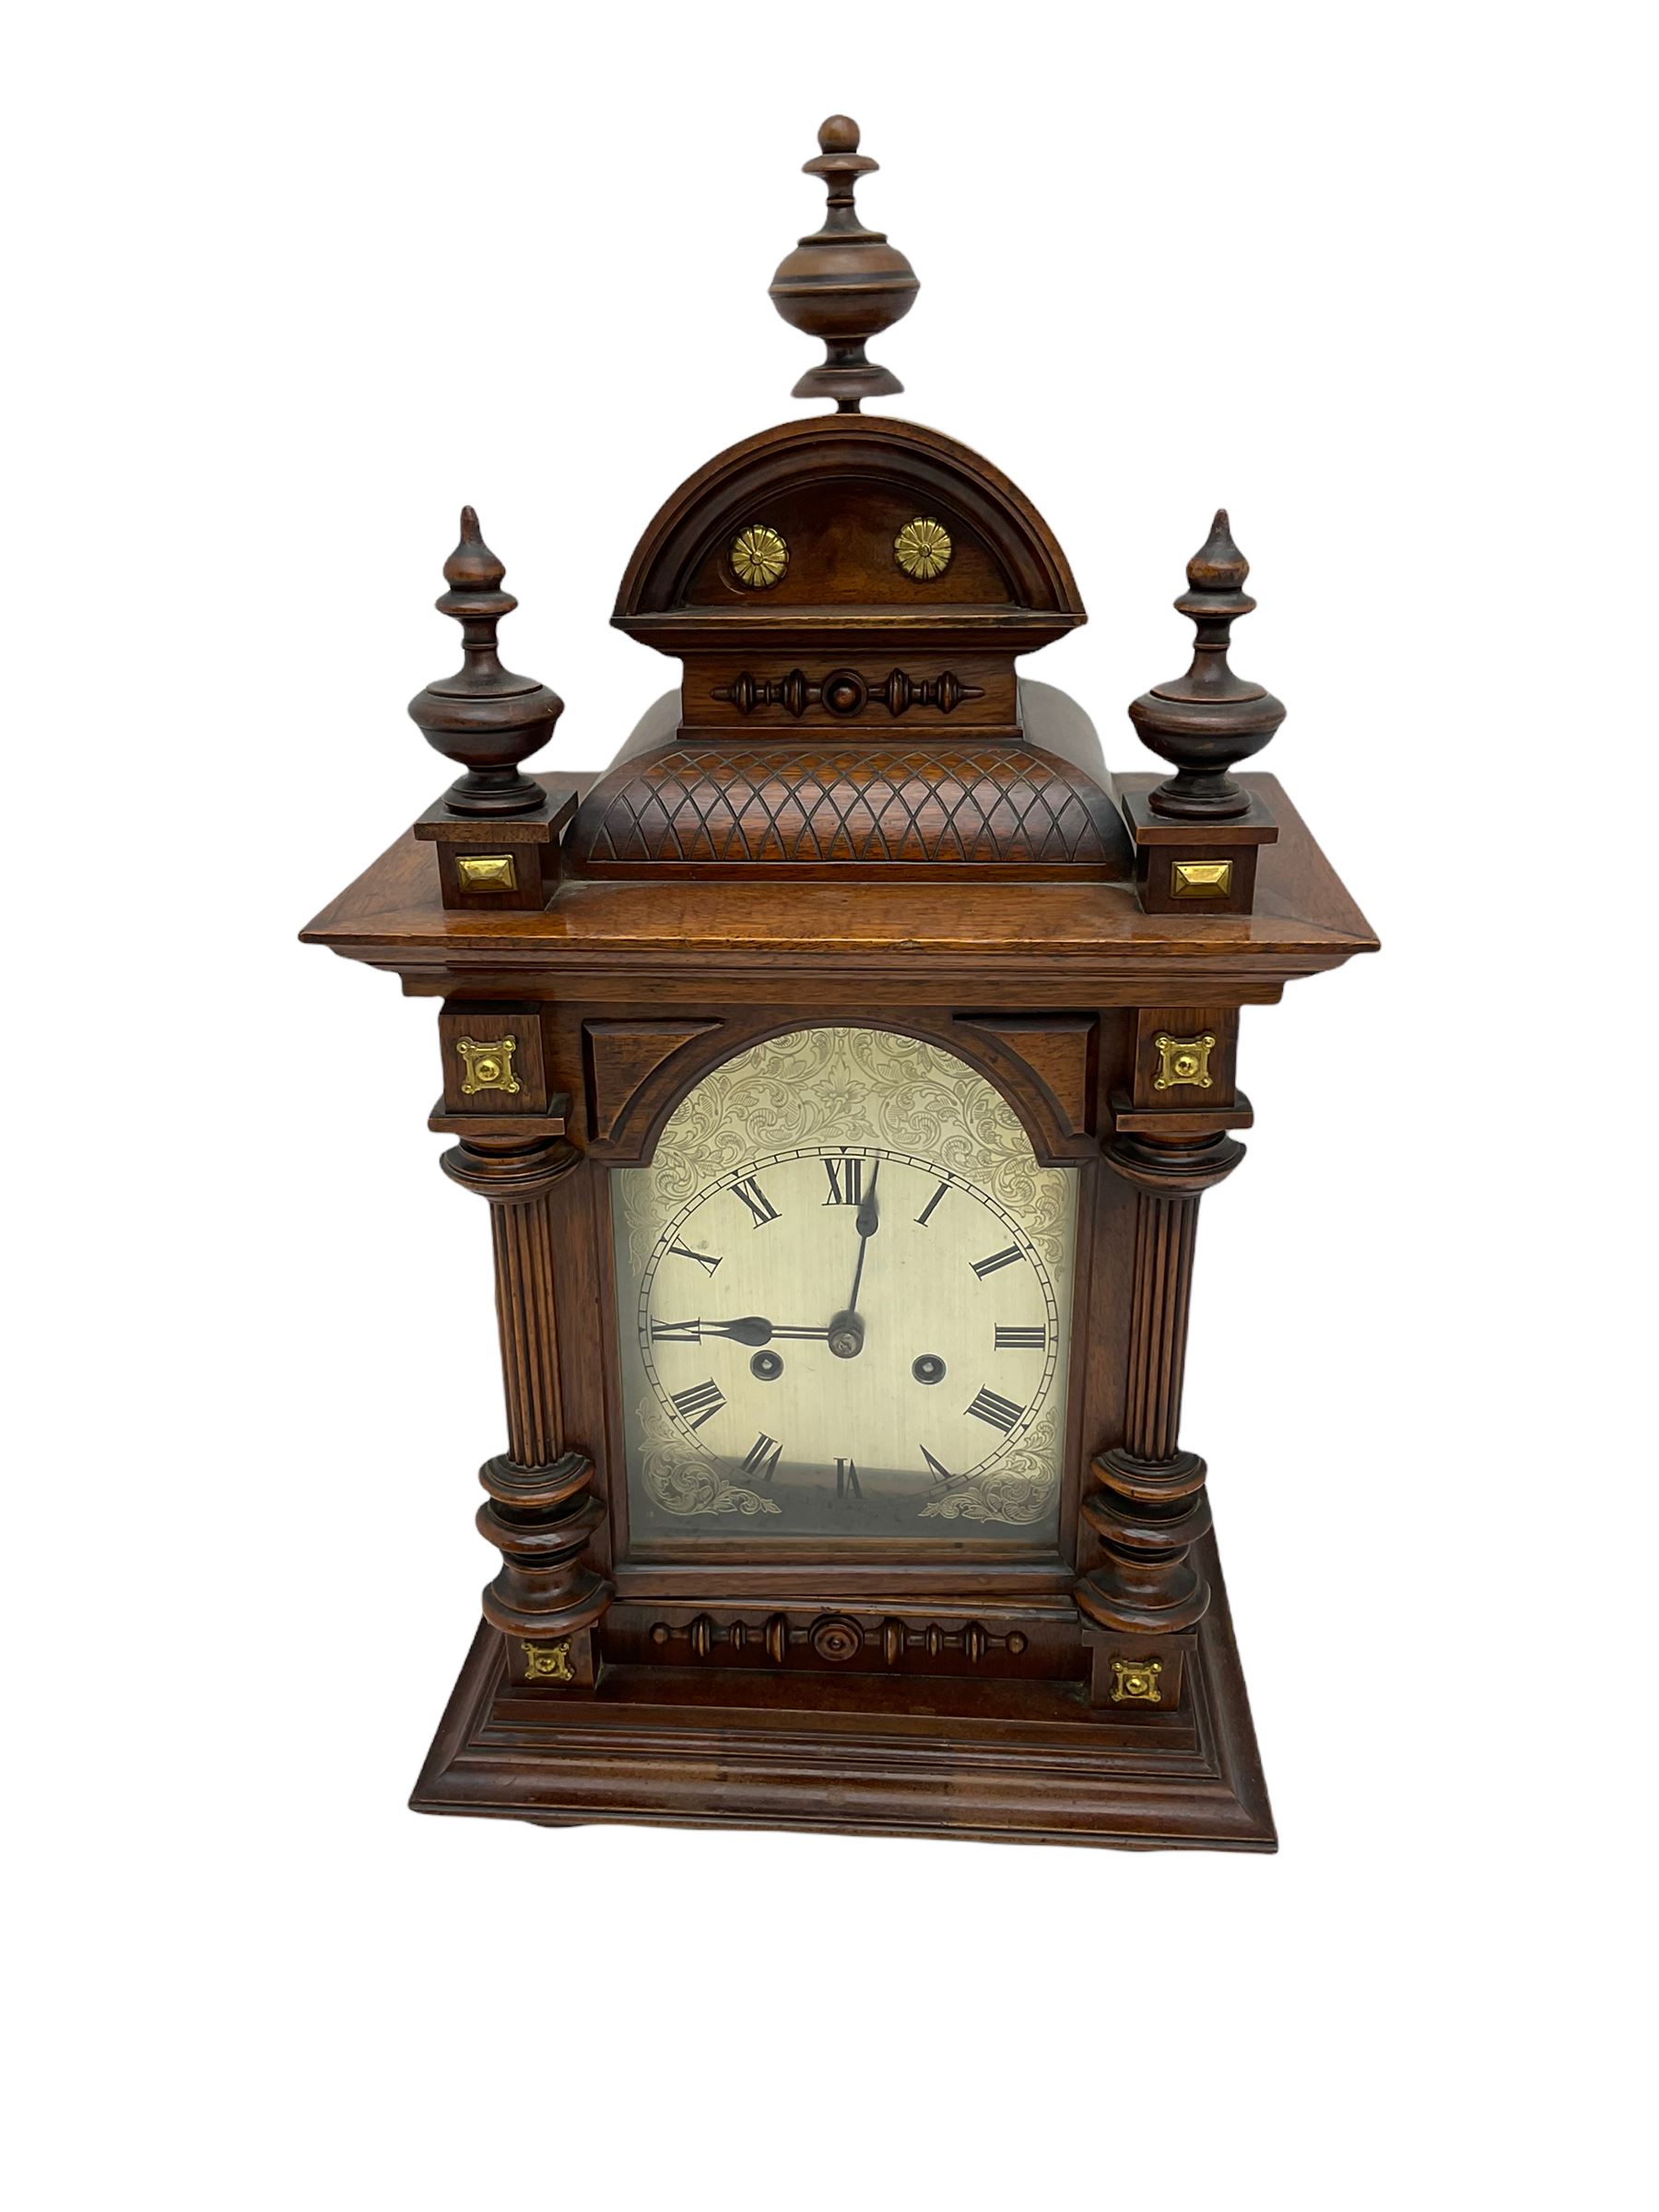 A late 19th century twin train striking mantle clock manufactured in Germany by Phillip Hass & Sohn